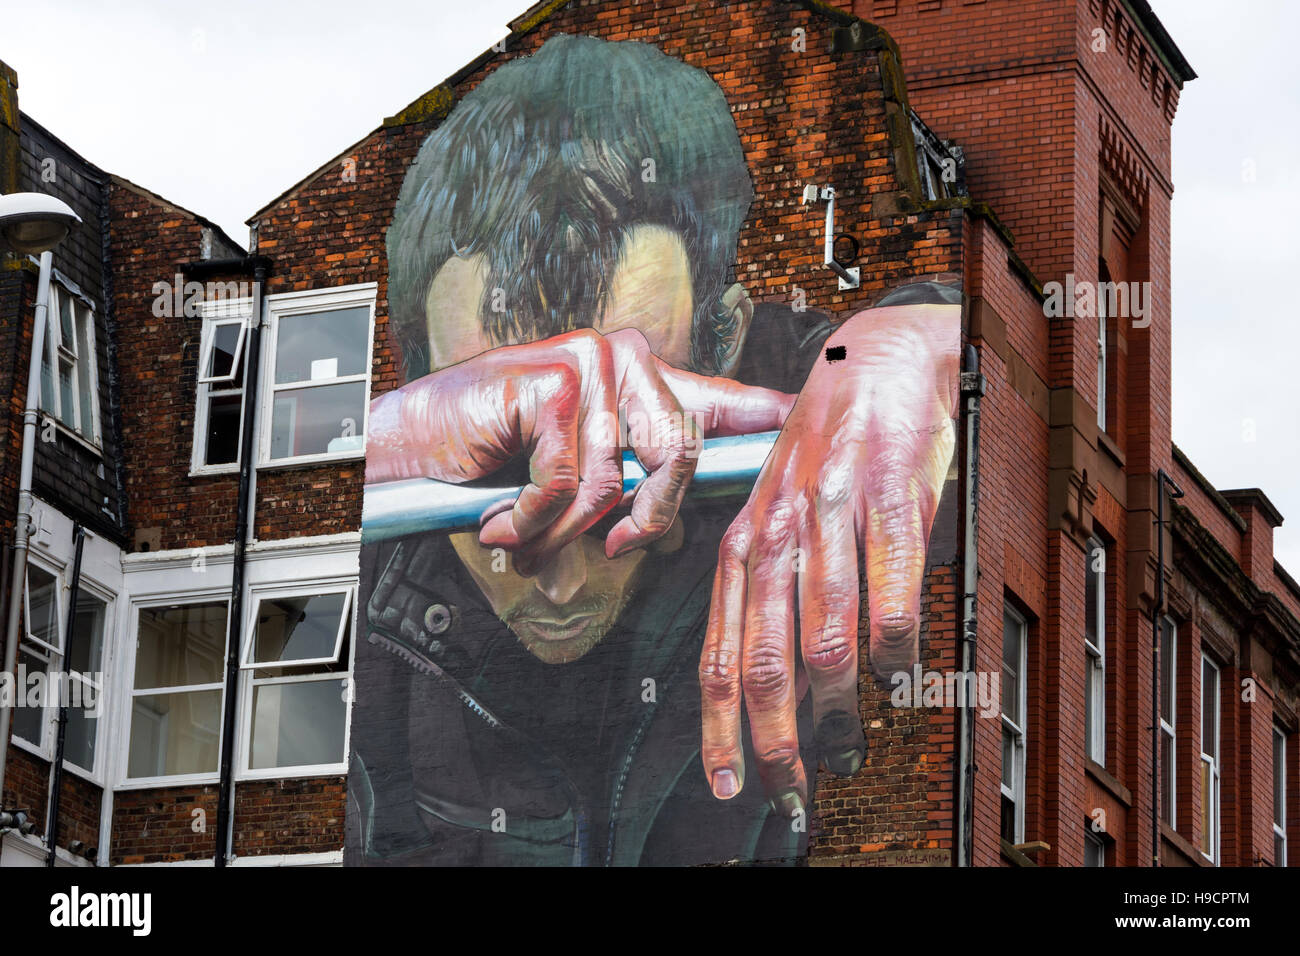 Wall mural 'Human Dignity Is Inviolable' by CASE (Case MacLaim), Cable Street, Northern Quarter, Manchester, UK Stock Photo